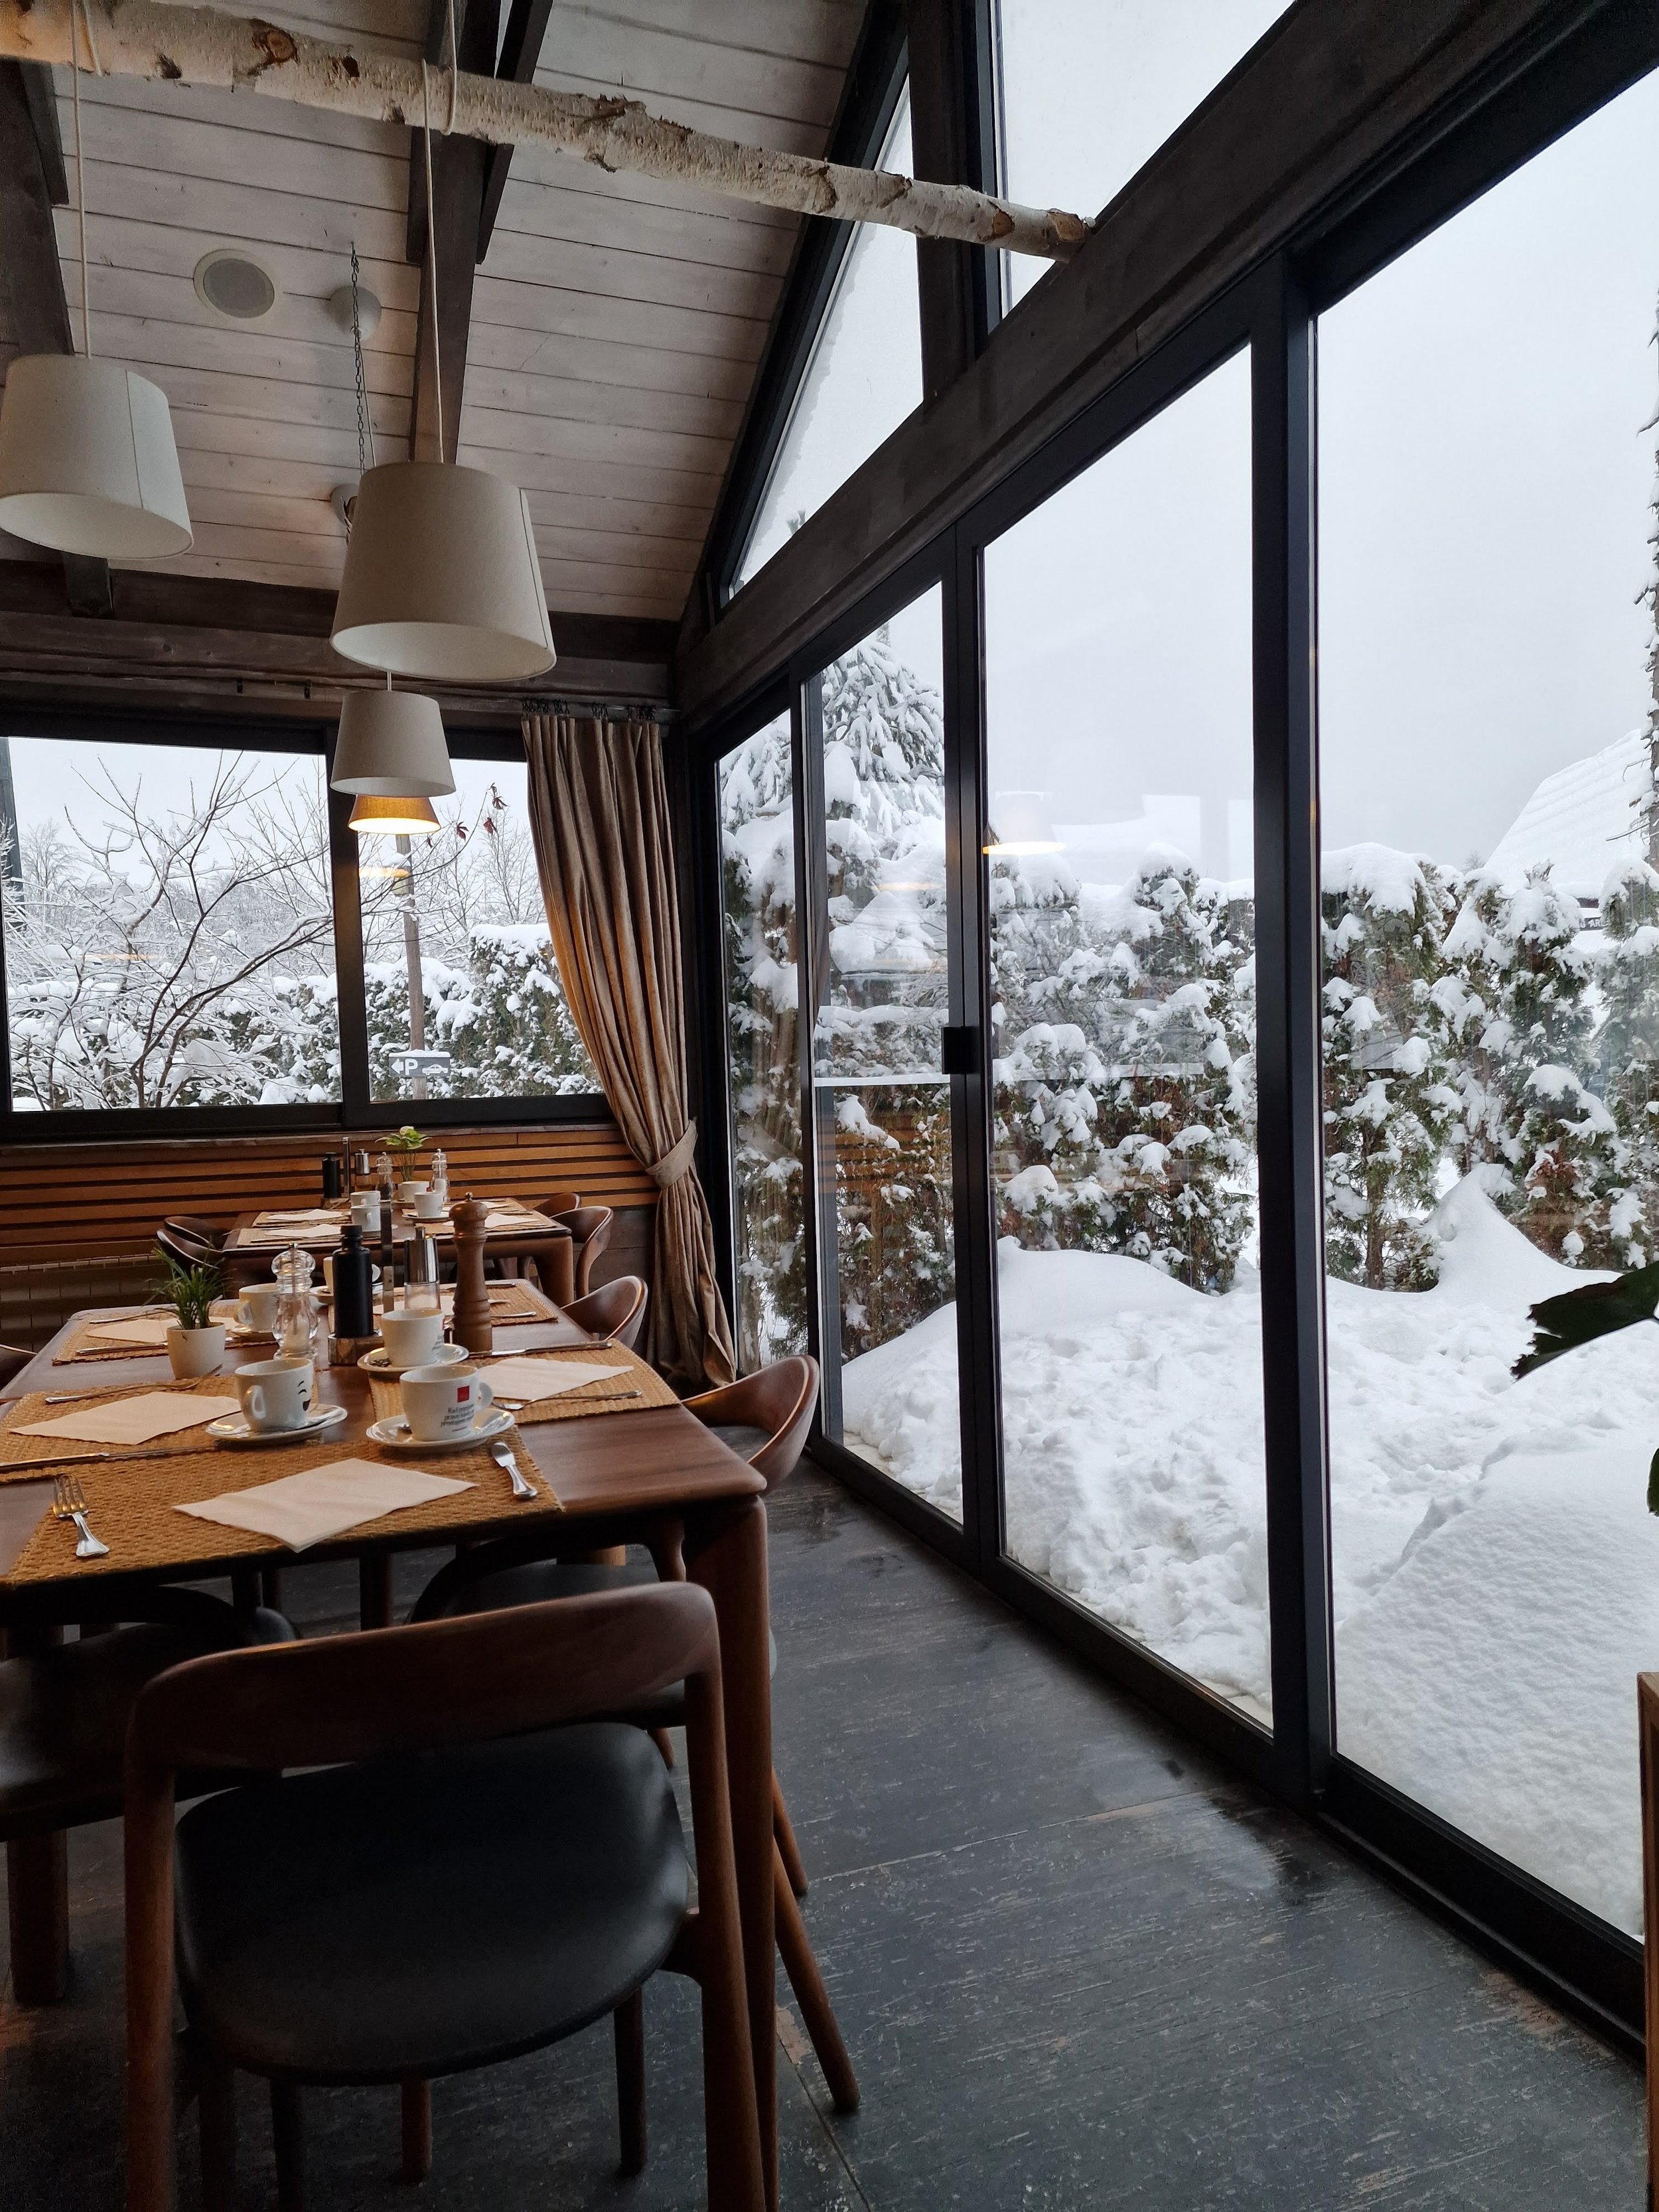 A restaurant with a wooden table set for 6 people next to a huge floor to ceiling window where snow drifts can be seen outside